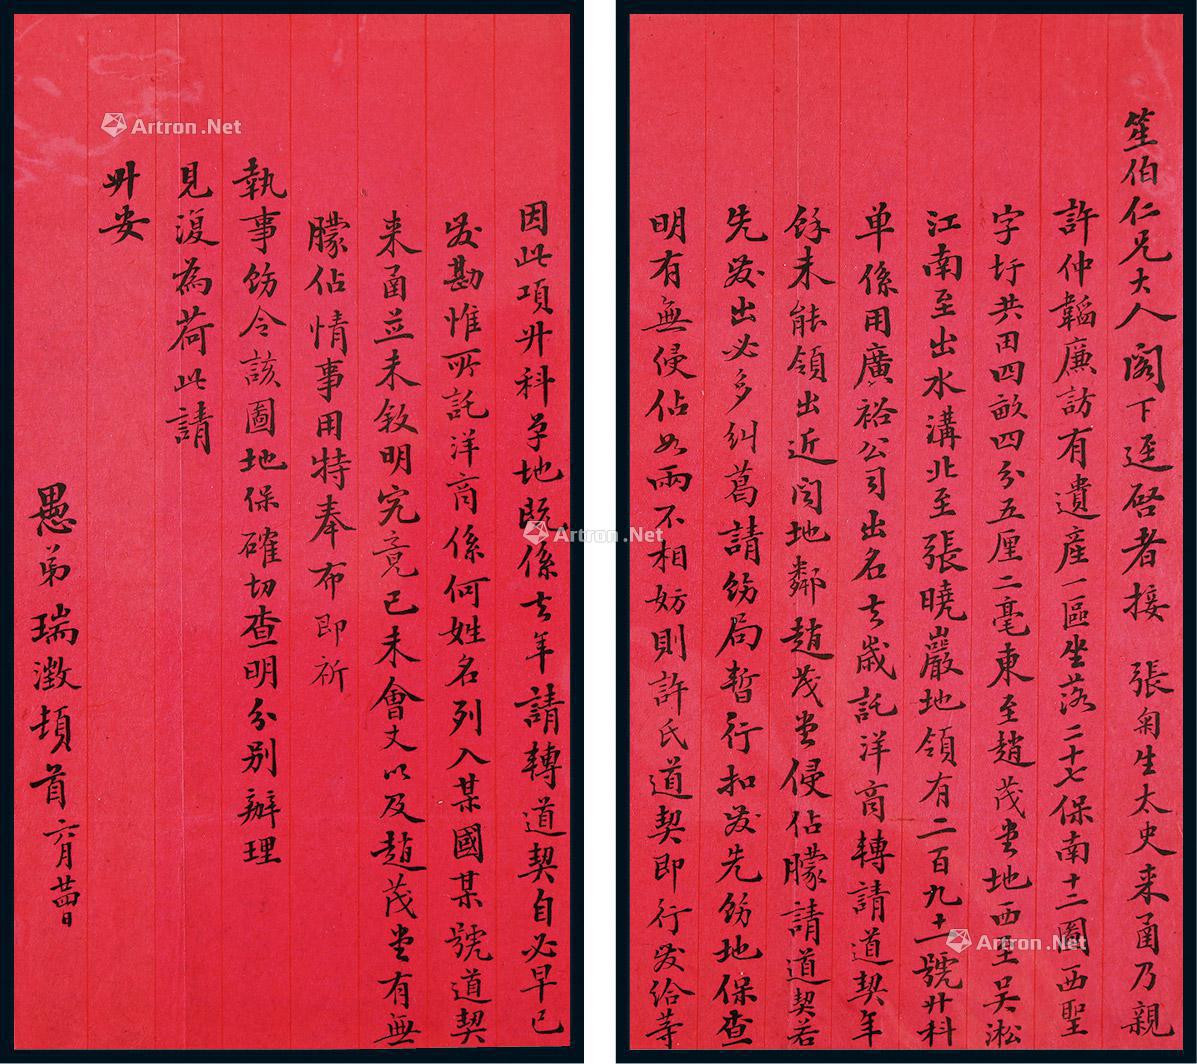 One letter of two pages by Rui Cheng to Shang Shengbo